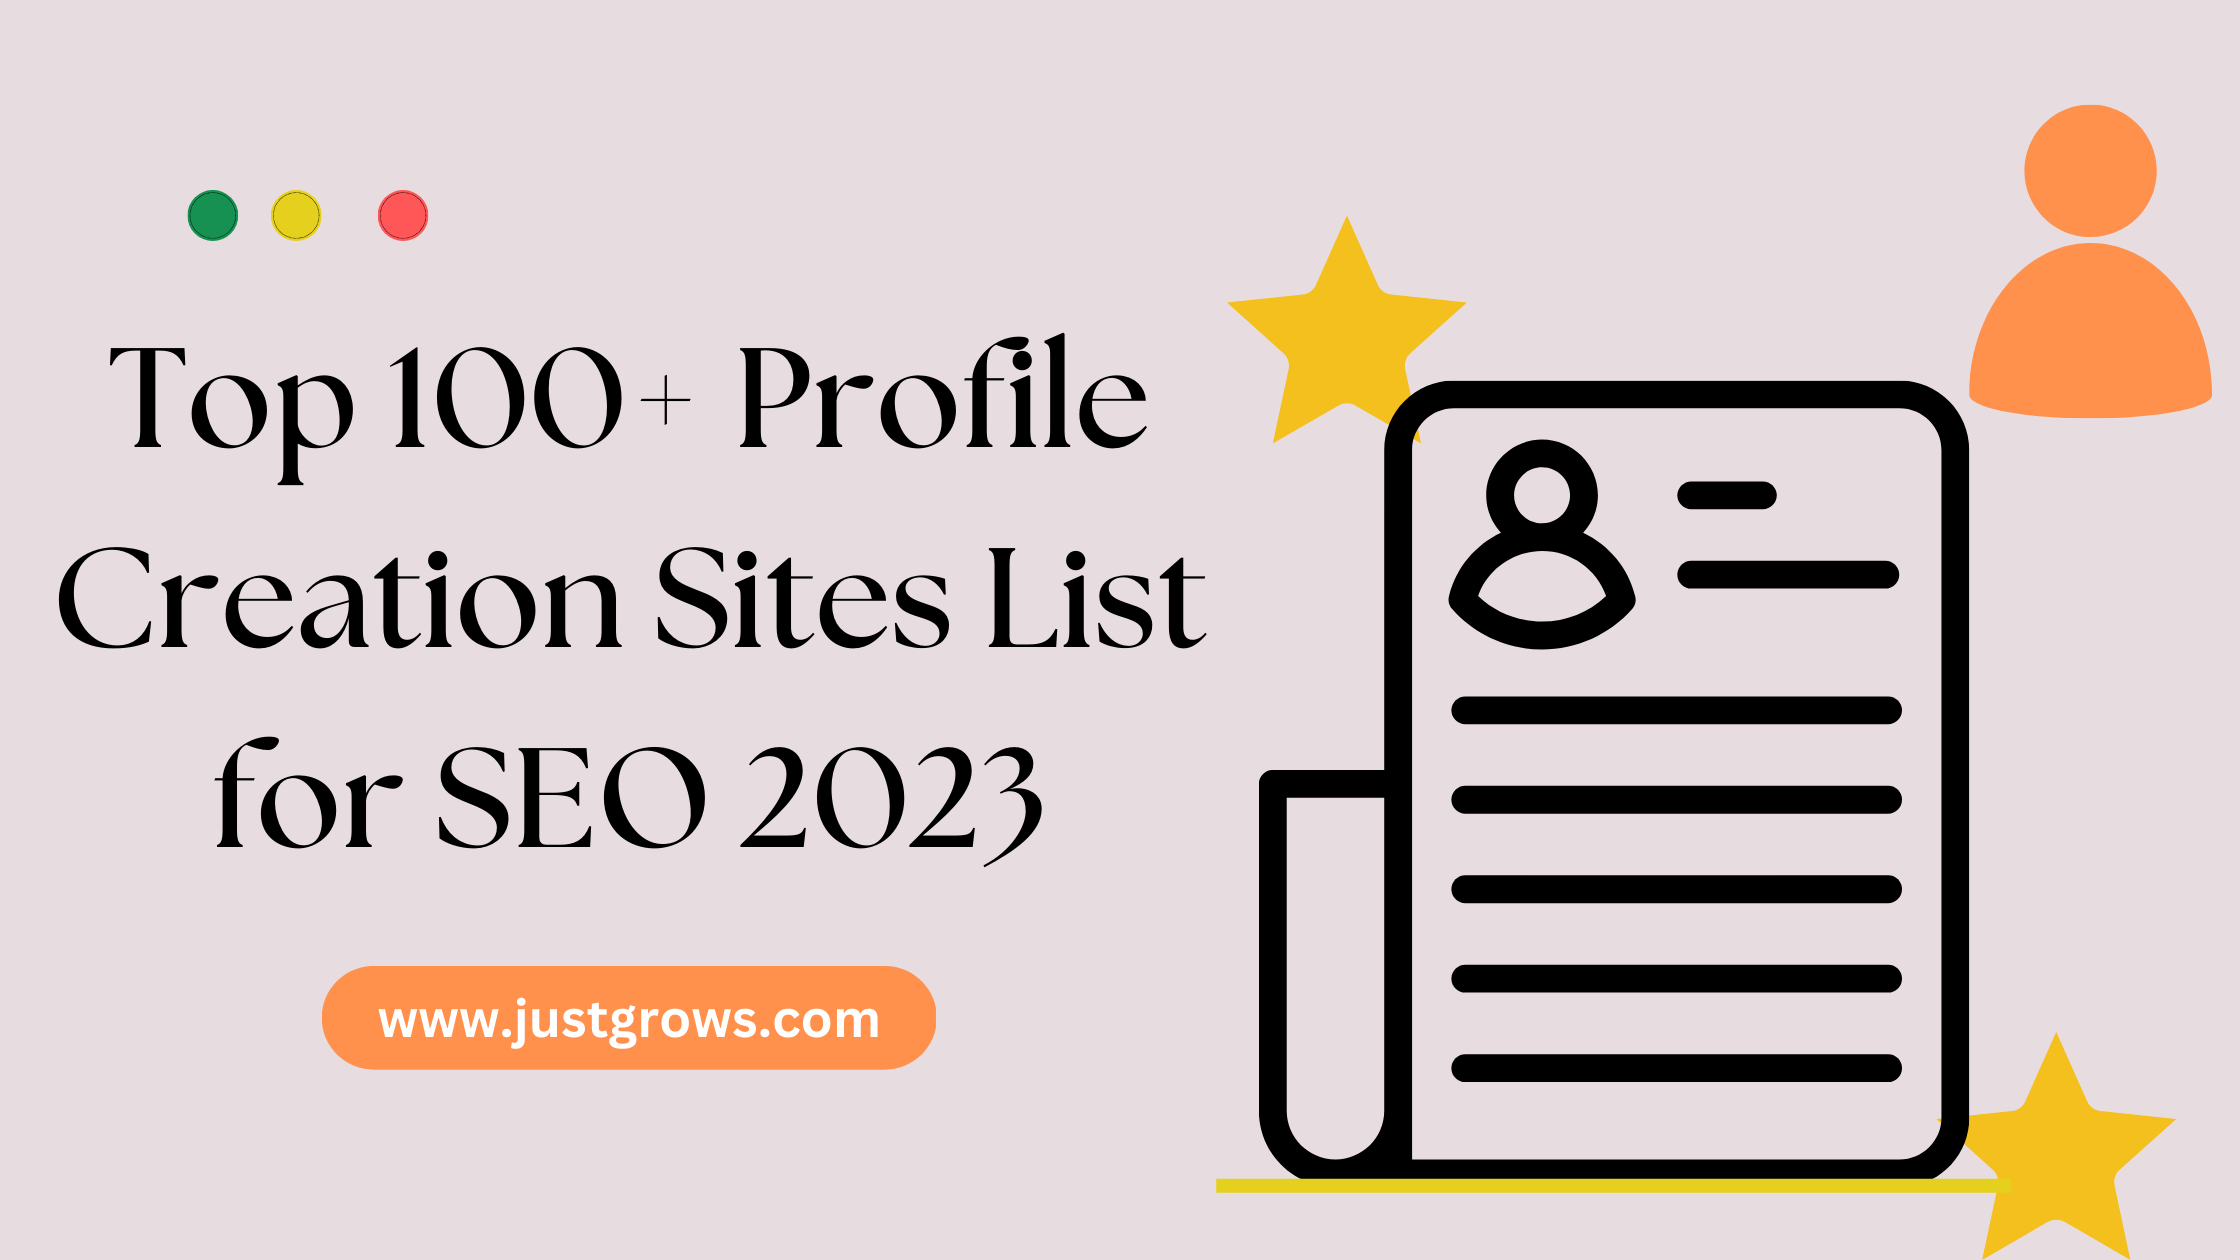 You are currently viewing Top 100+ Profile Creation Sites List for SEO 2023